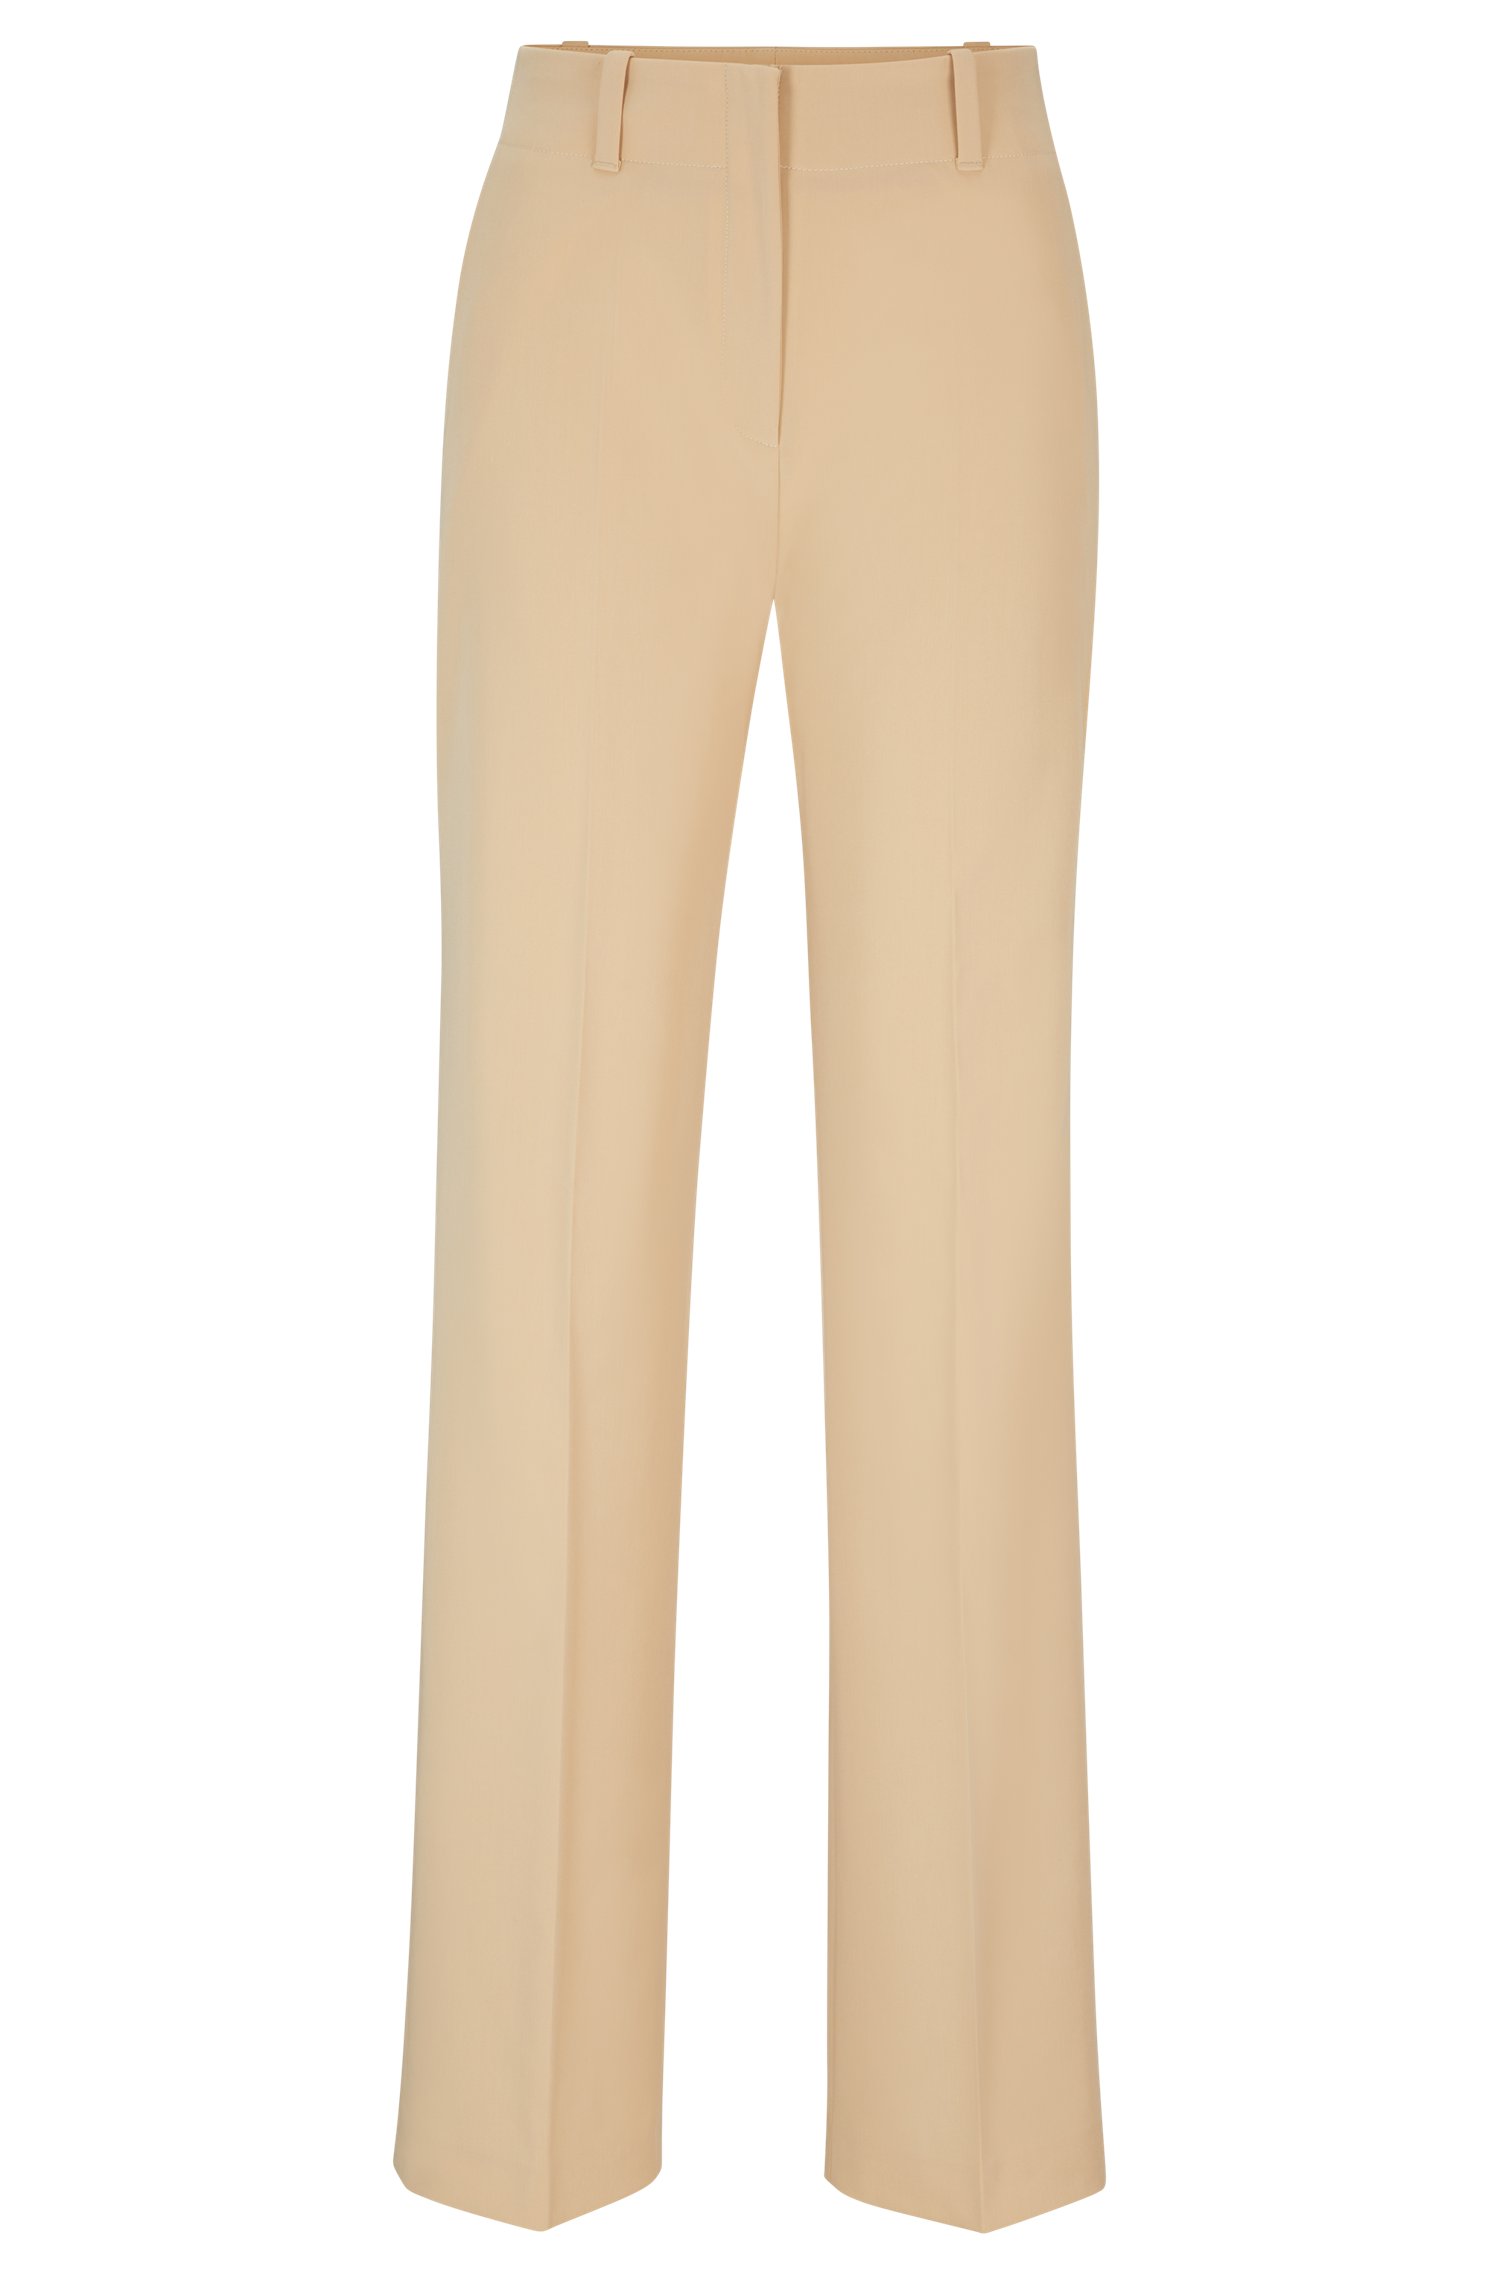 Regular-fit trousers stretch fabric with wide leg